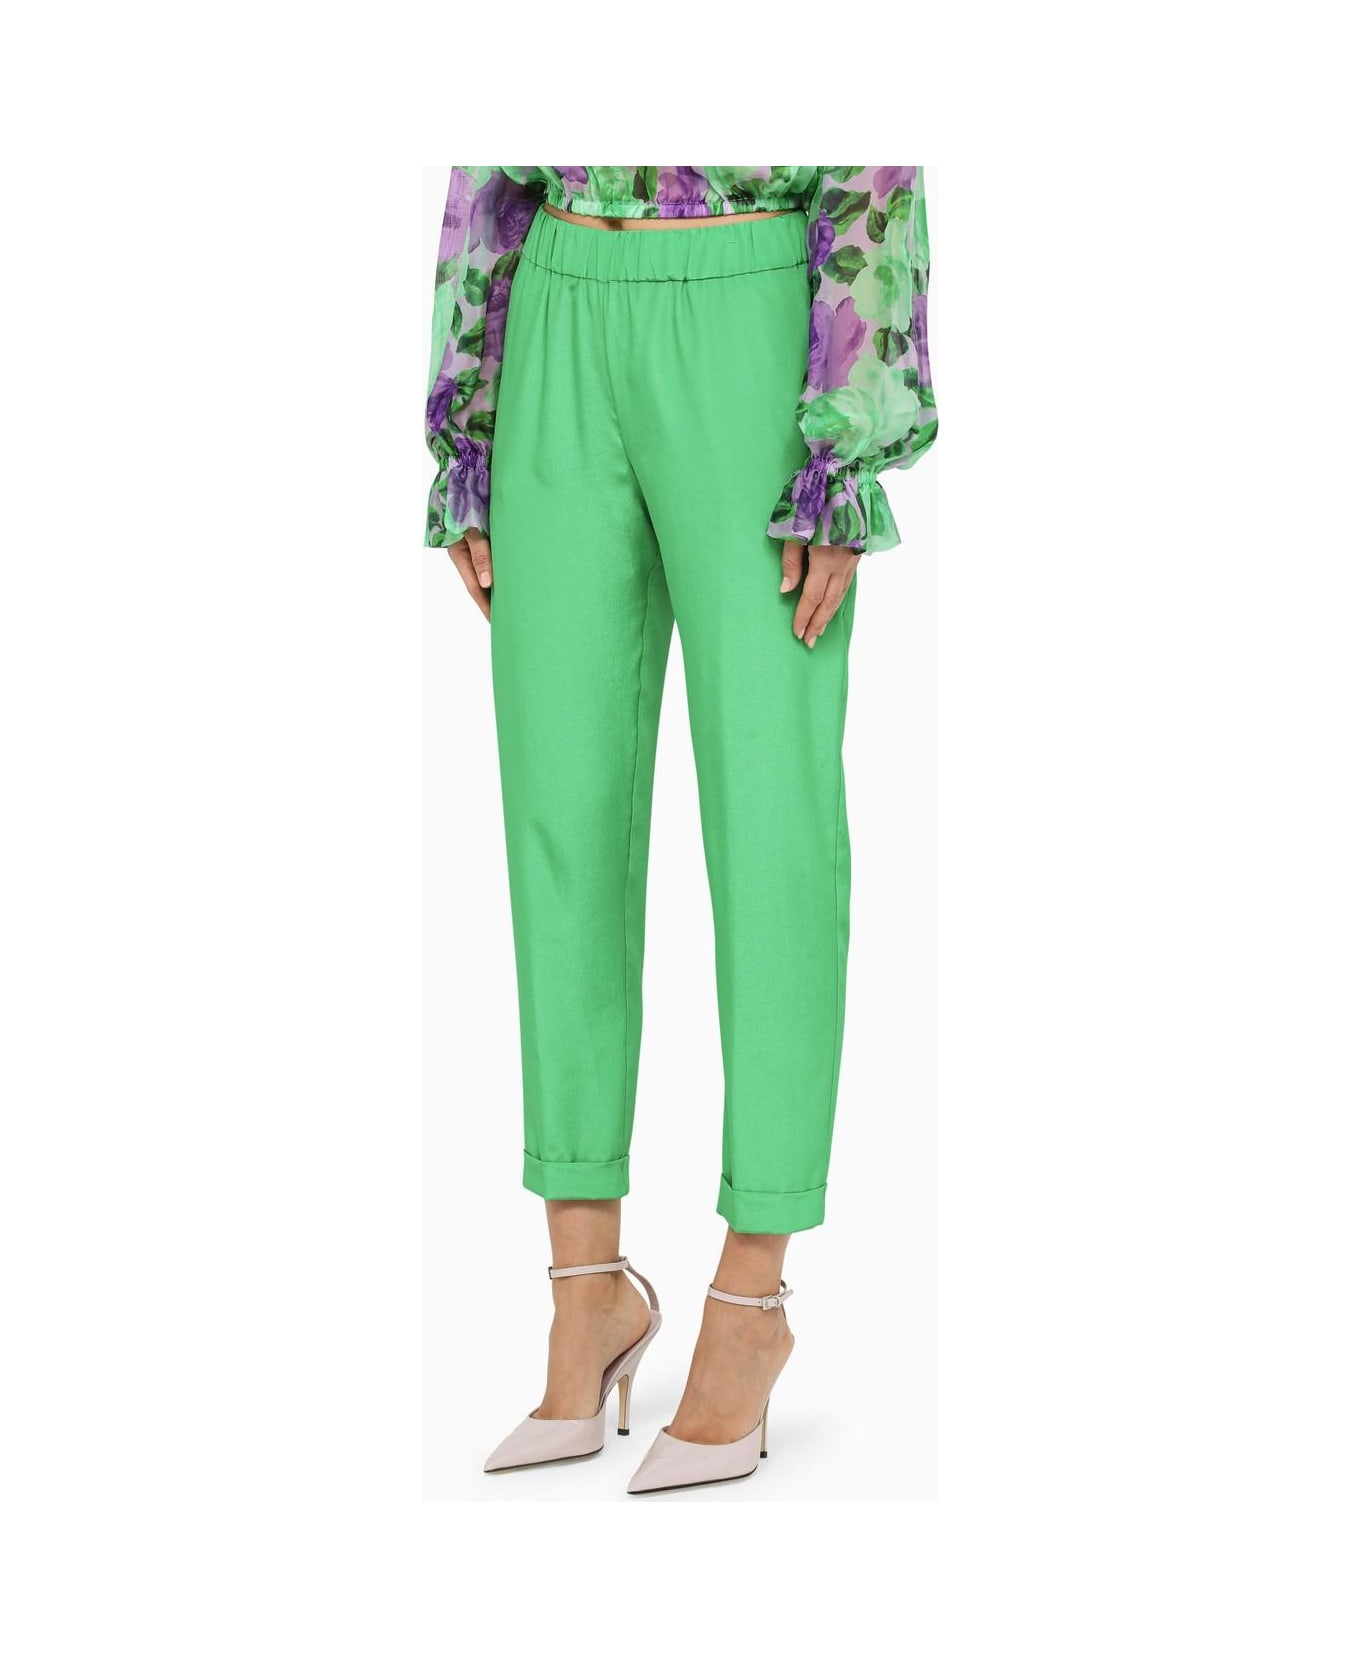 Parosh Green Satin Trousers With Elasticated Waistband - GREEN